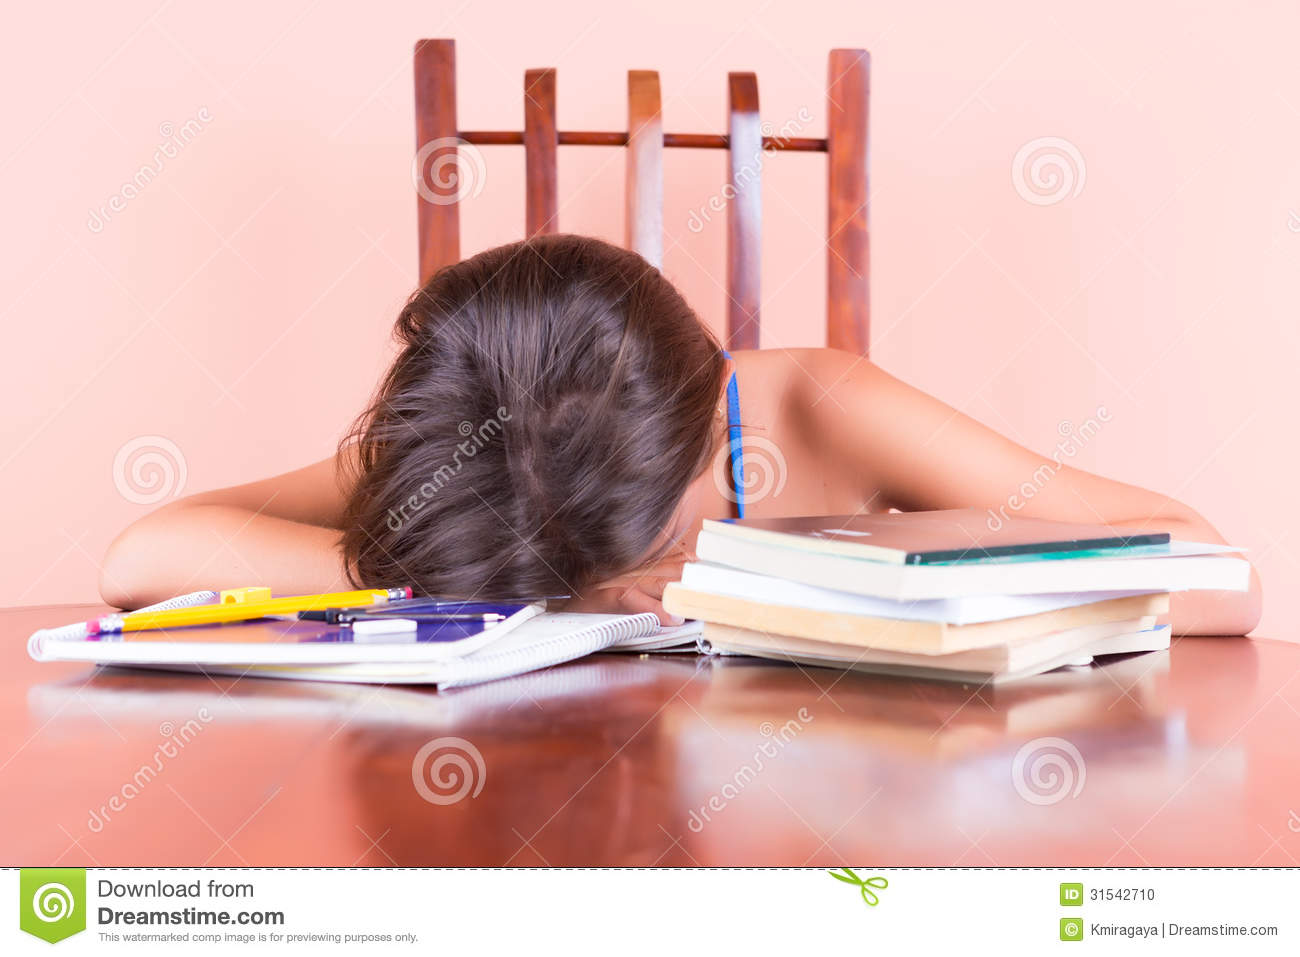 Exhausted Student Sleeping With Her Head On A Table And Books By Her